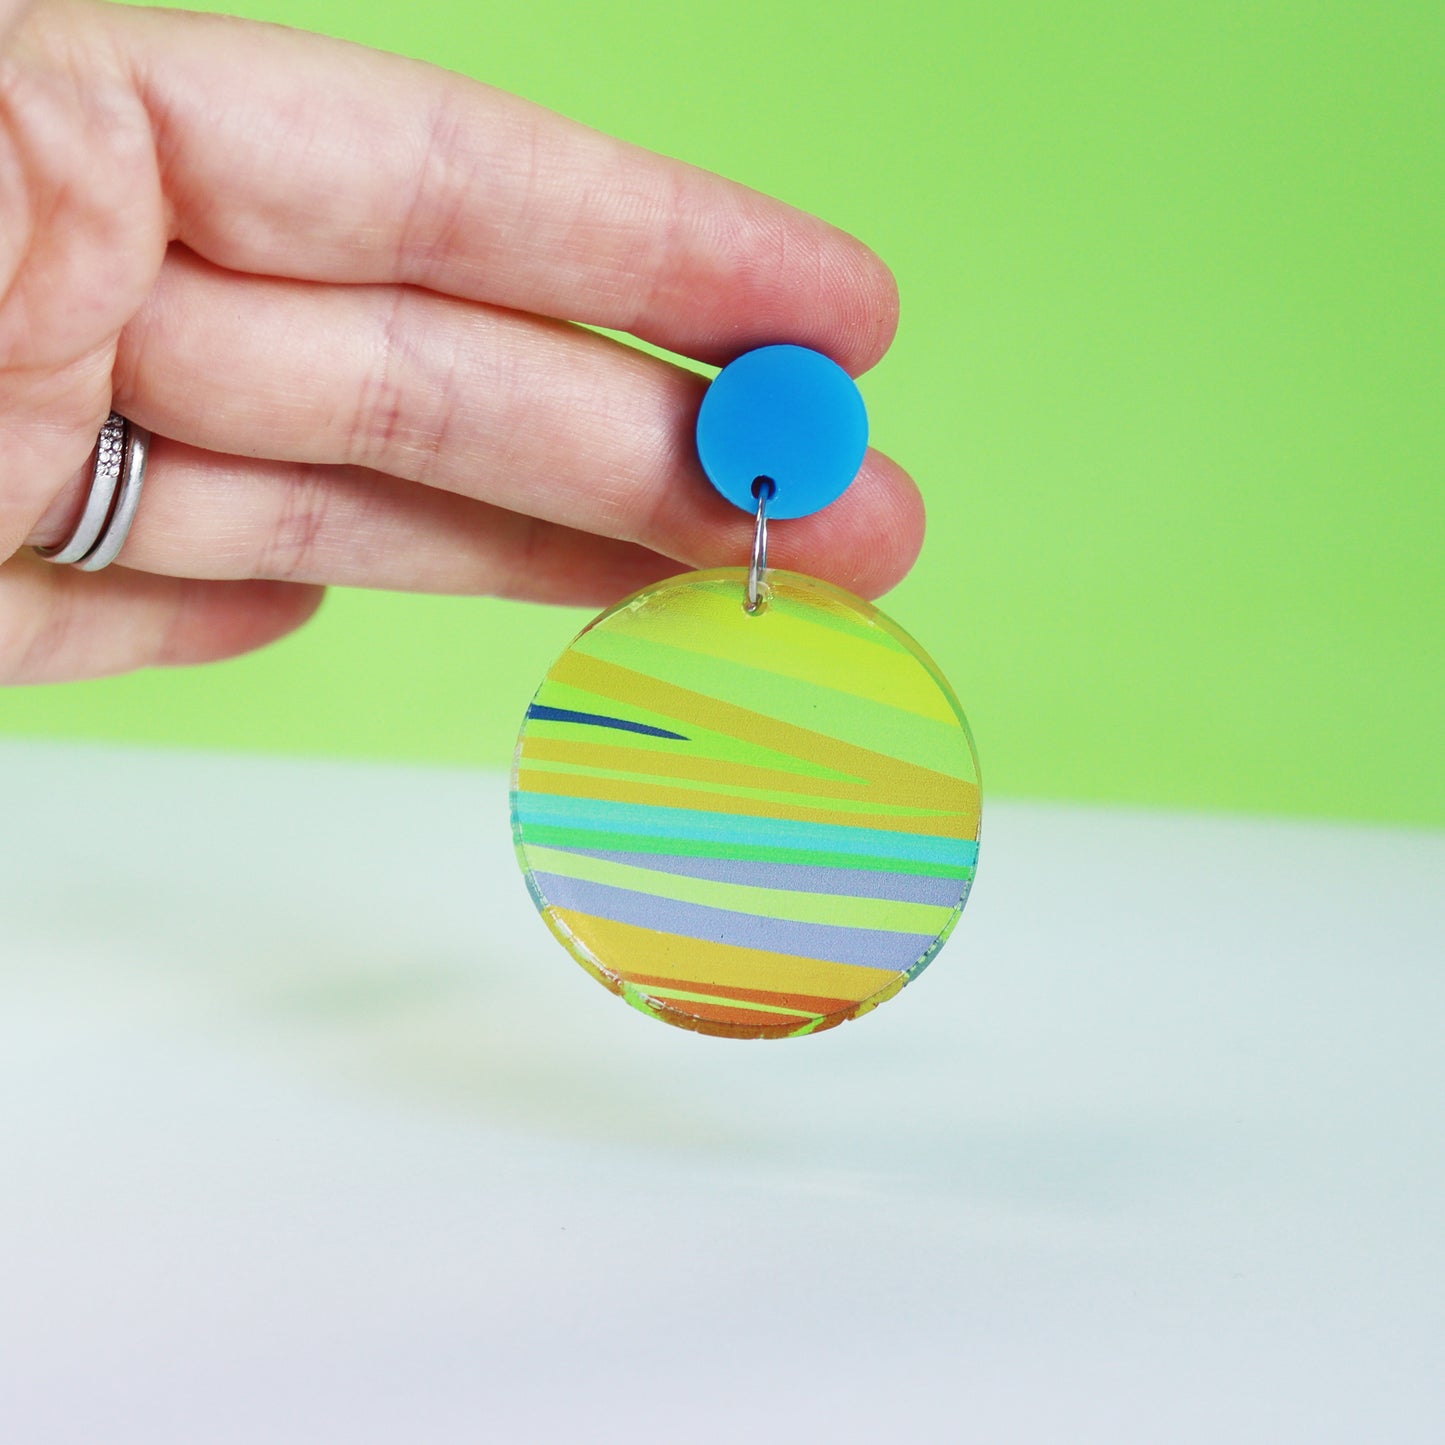 printed acrylic colourful mismatch circle earrings shown in a hand